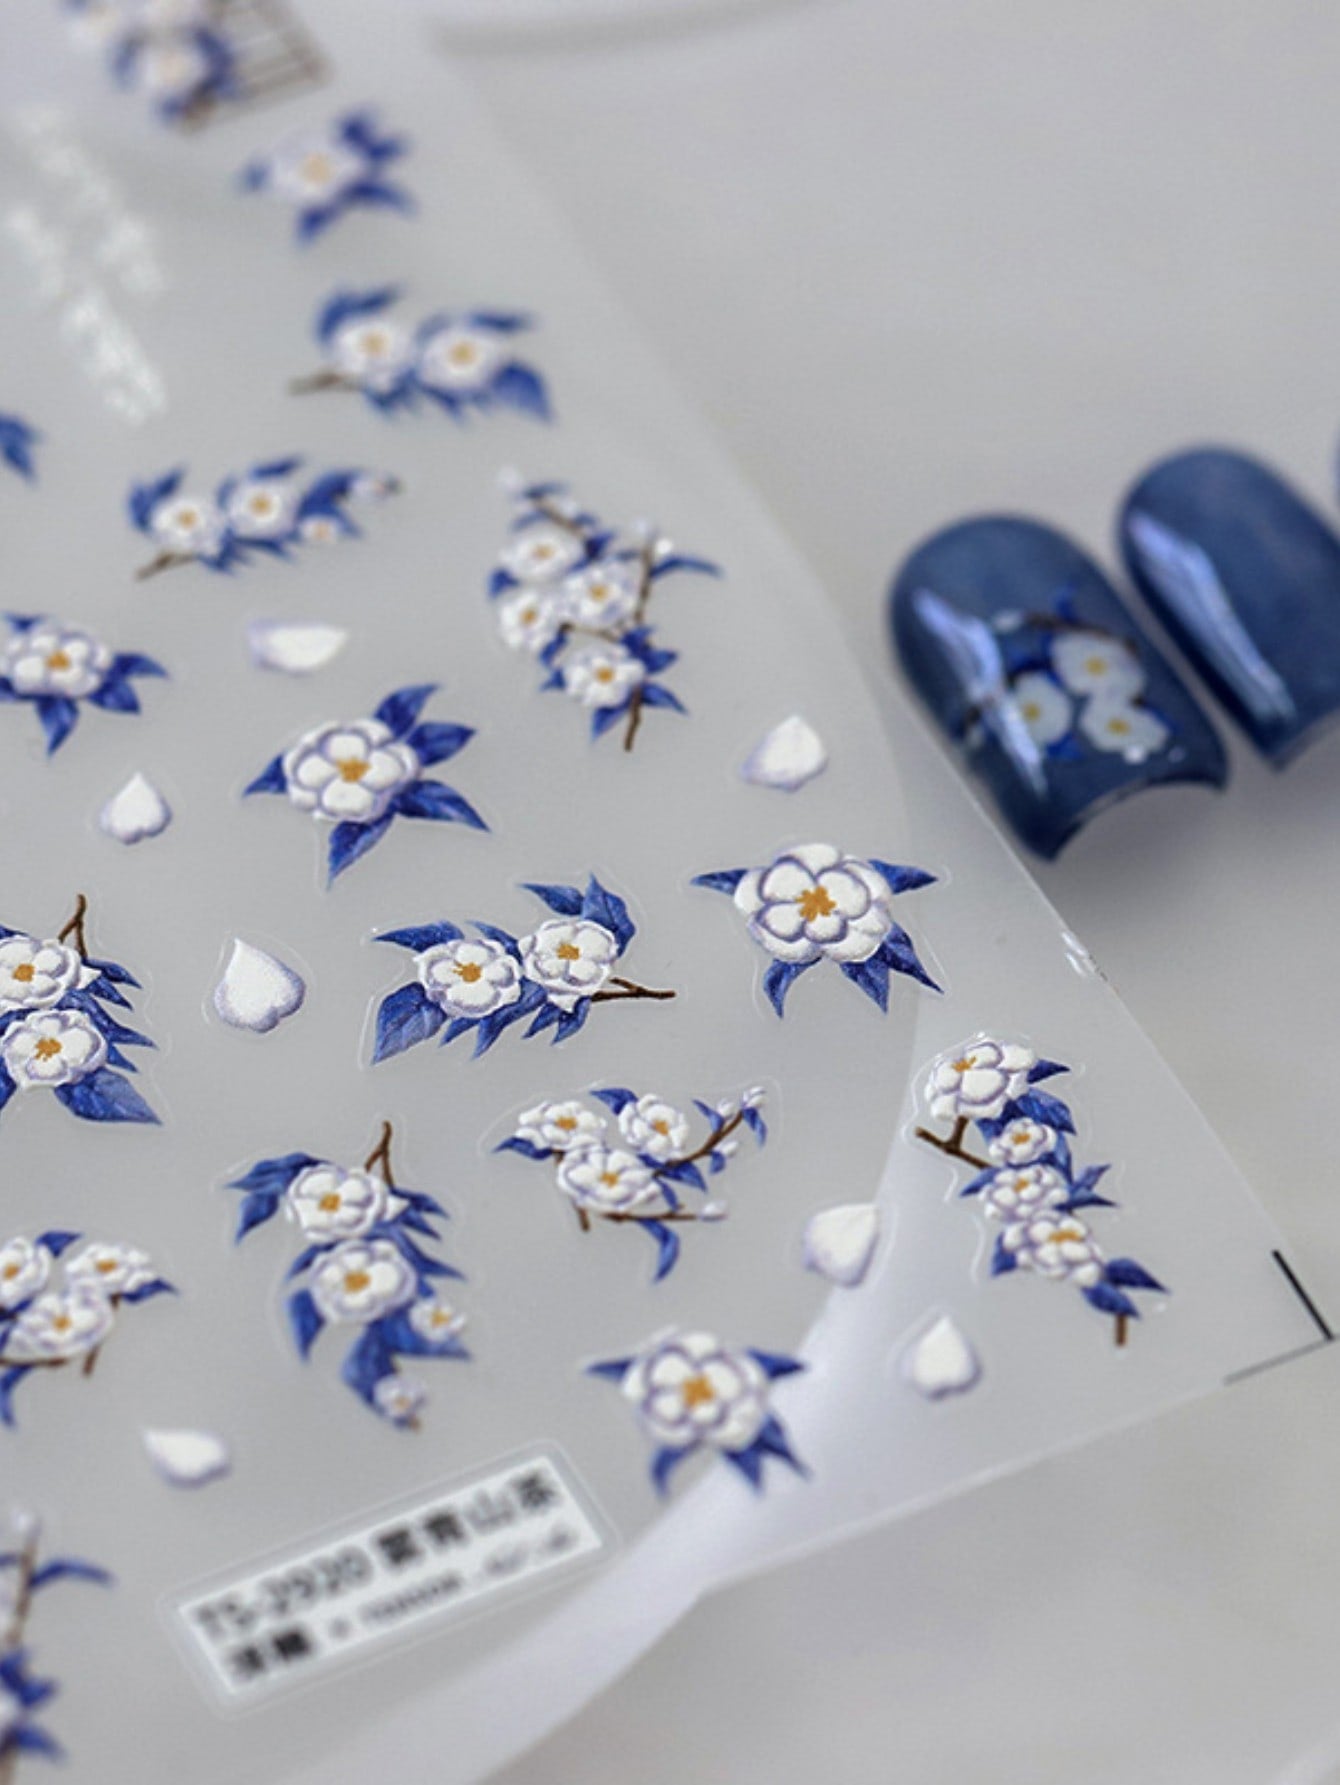 1pc 3d 5d Thin & Tough Embossed Nail Sticker With Blue Floral Design And Back Glue For Nail Art